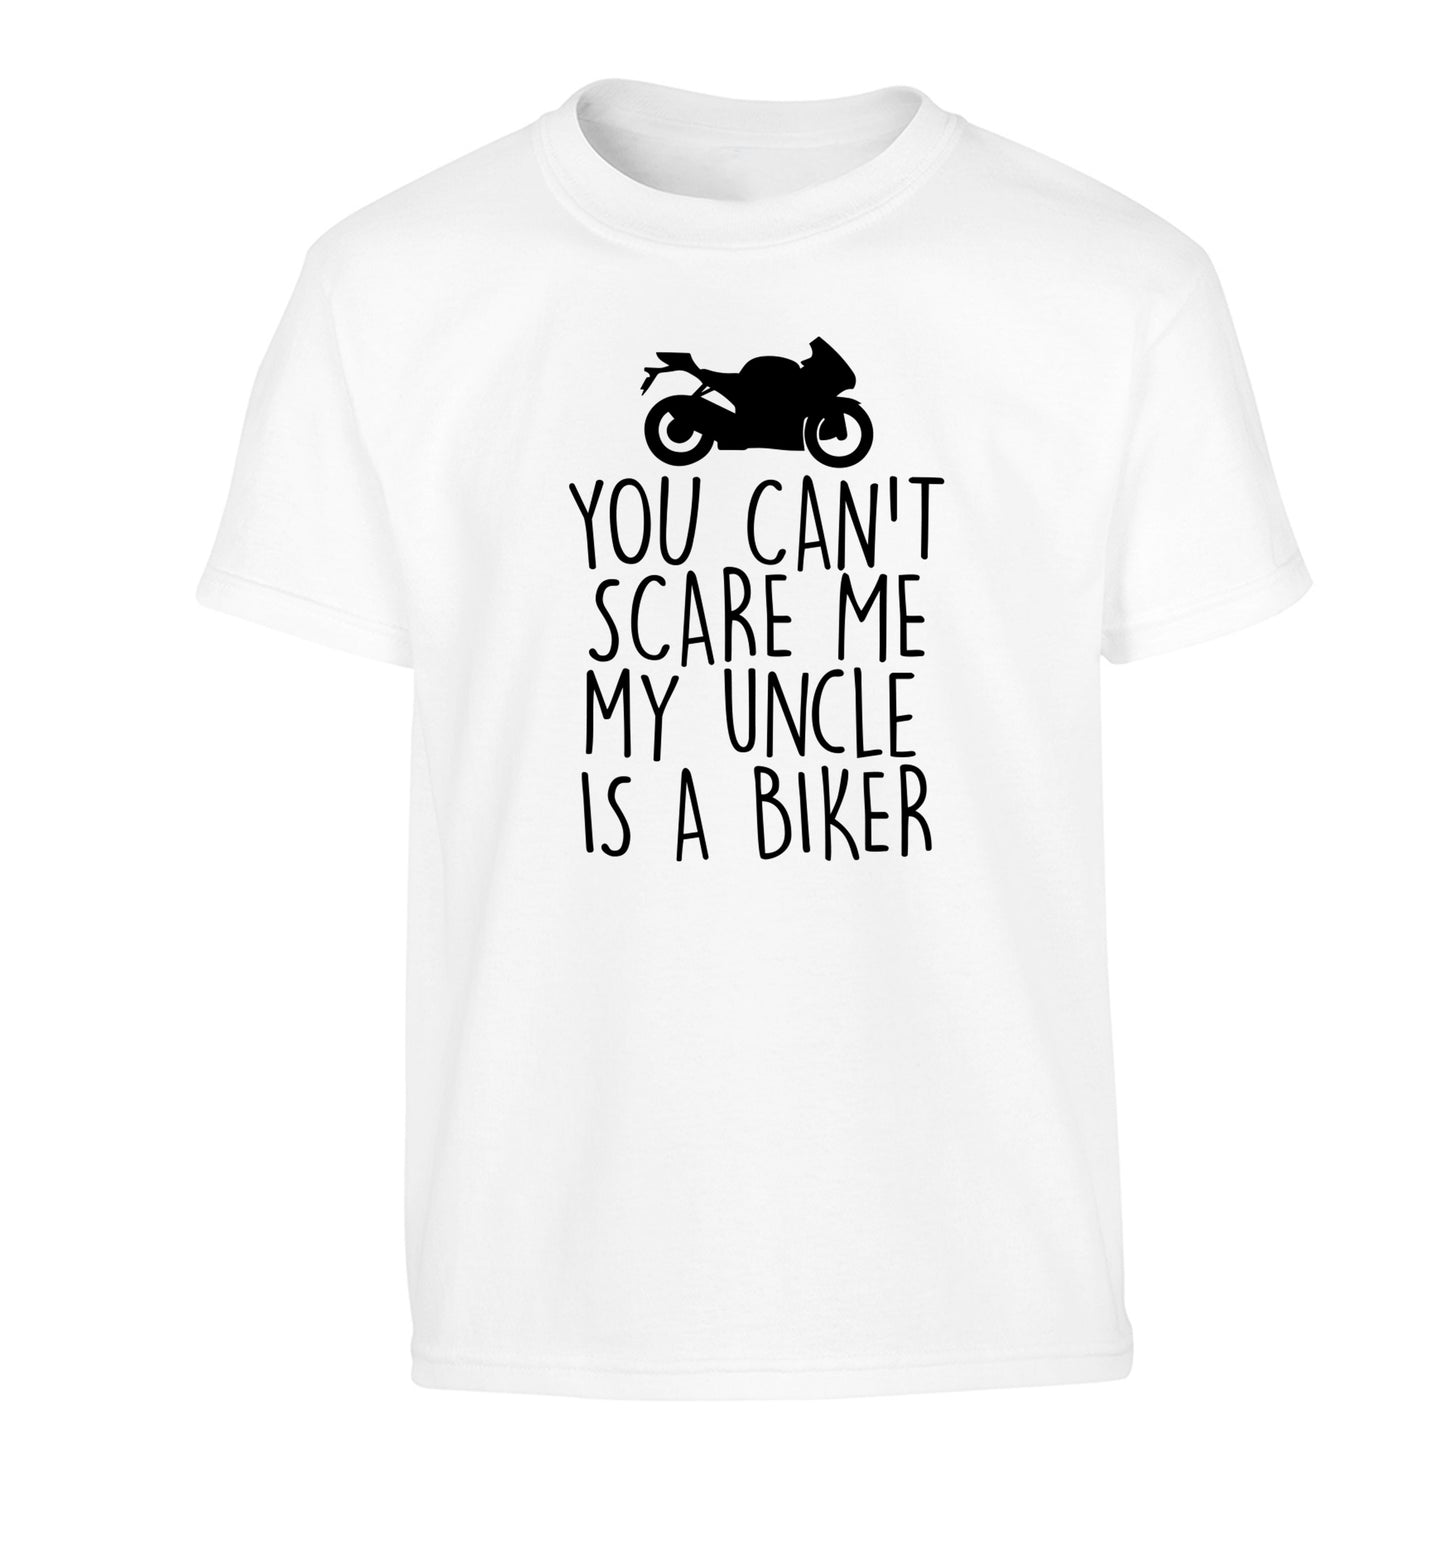 You can't scare me my uncle is a biker Children's white Tshirt 12-13 Years